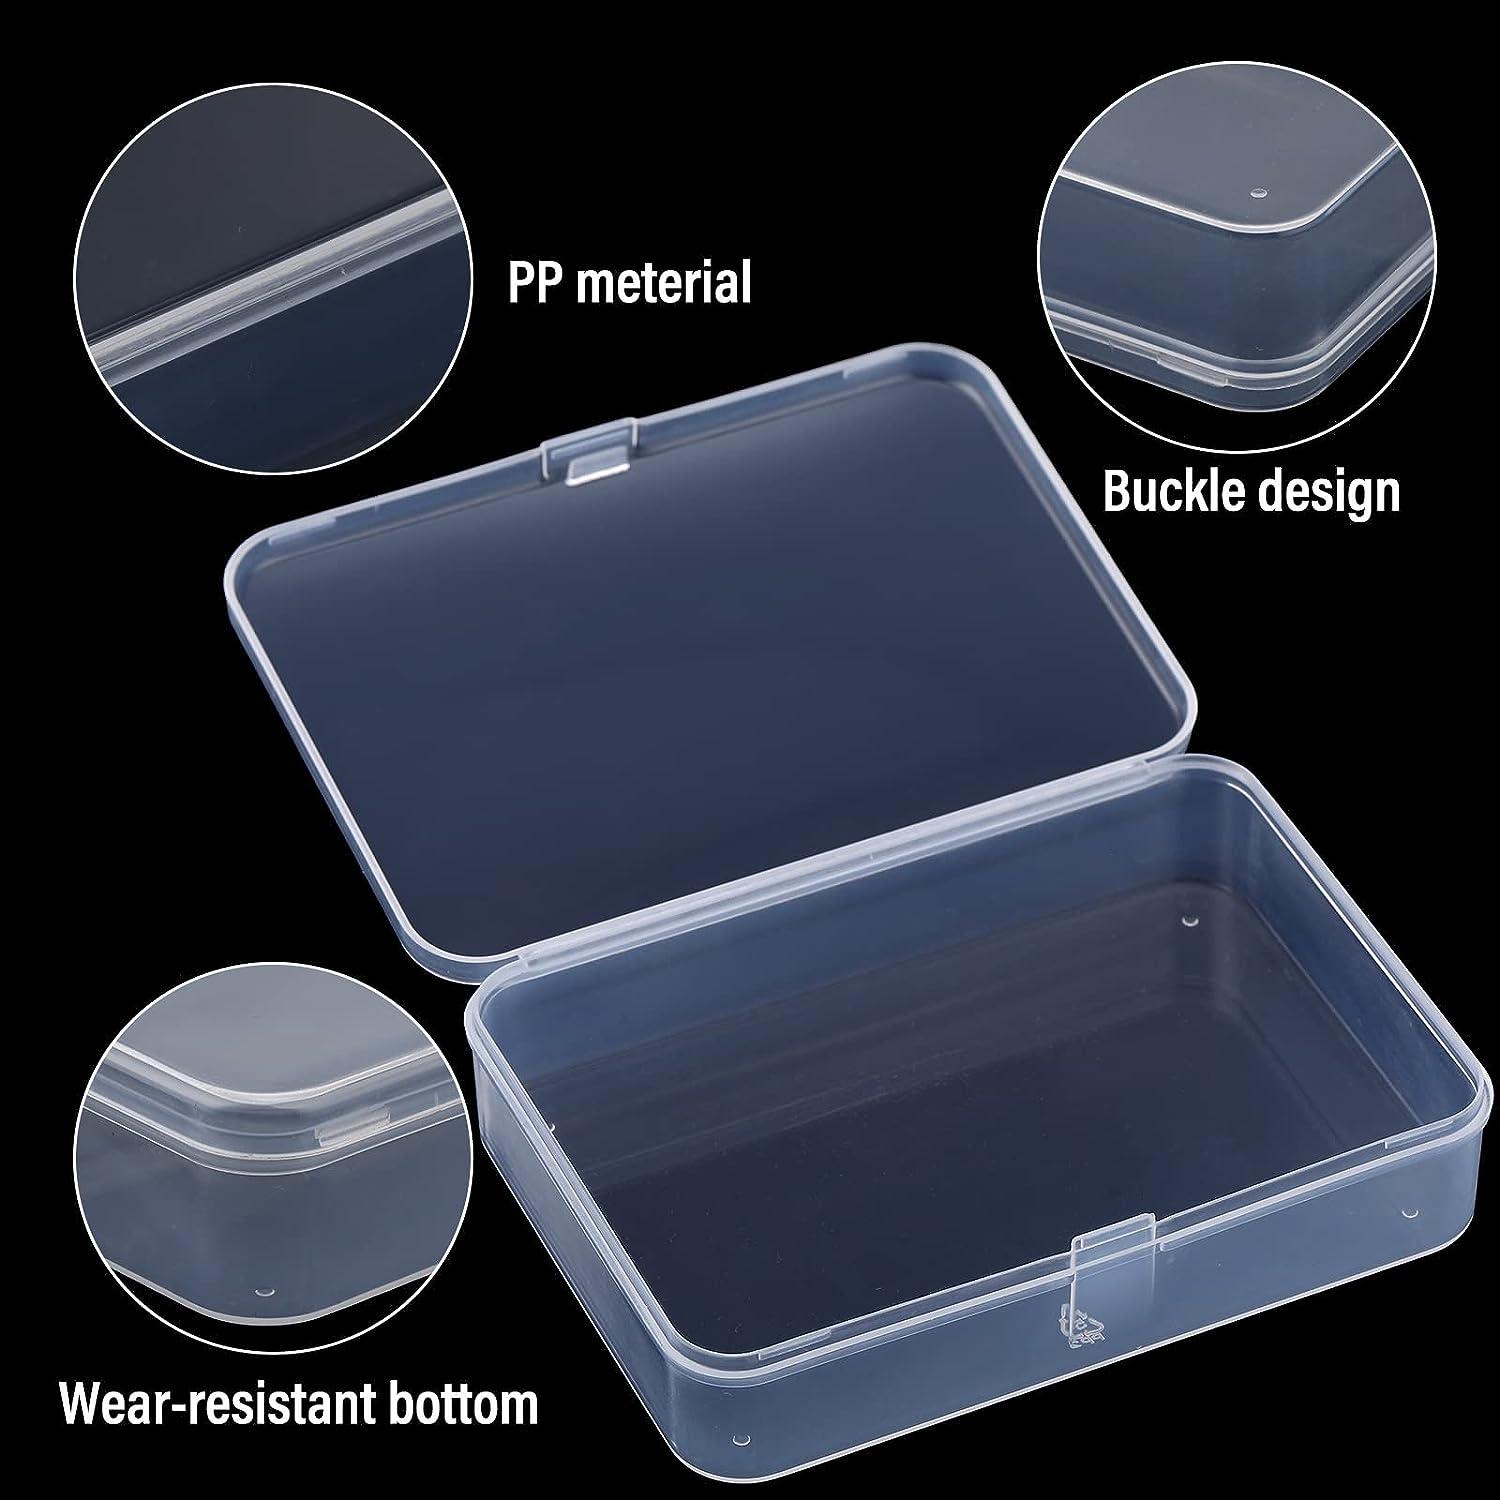 The Beadsmith Keeper Squares Storage Container, Square Jars with Lids 1.25x2.3, 10 Containers